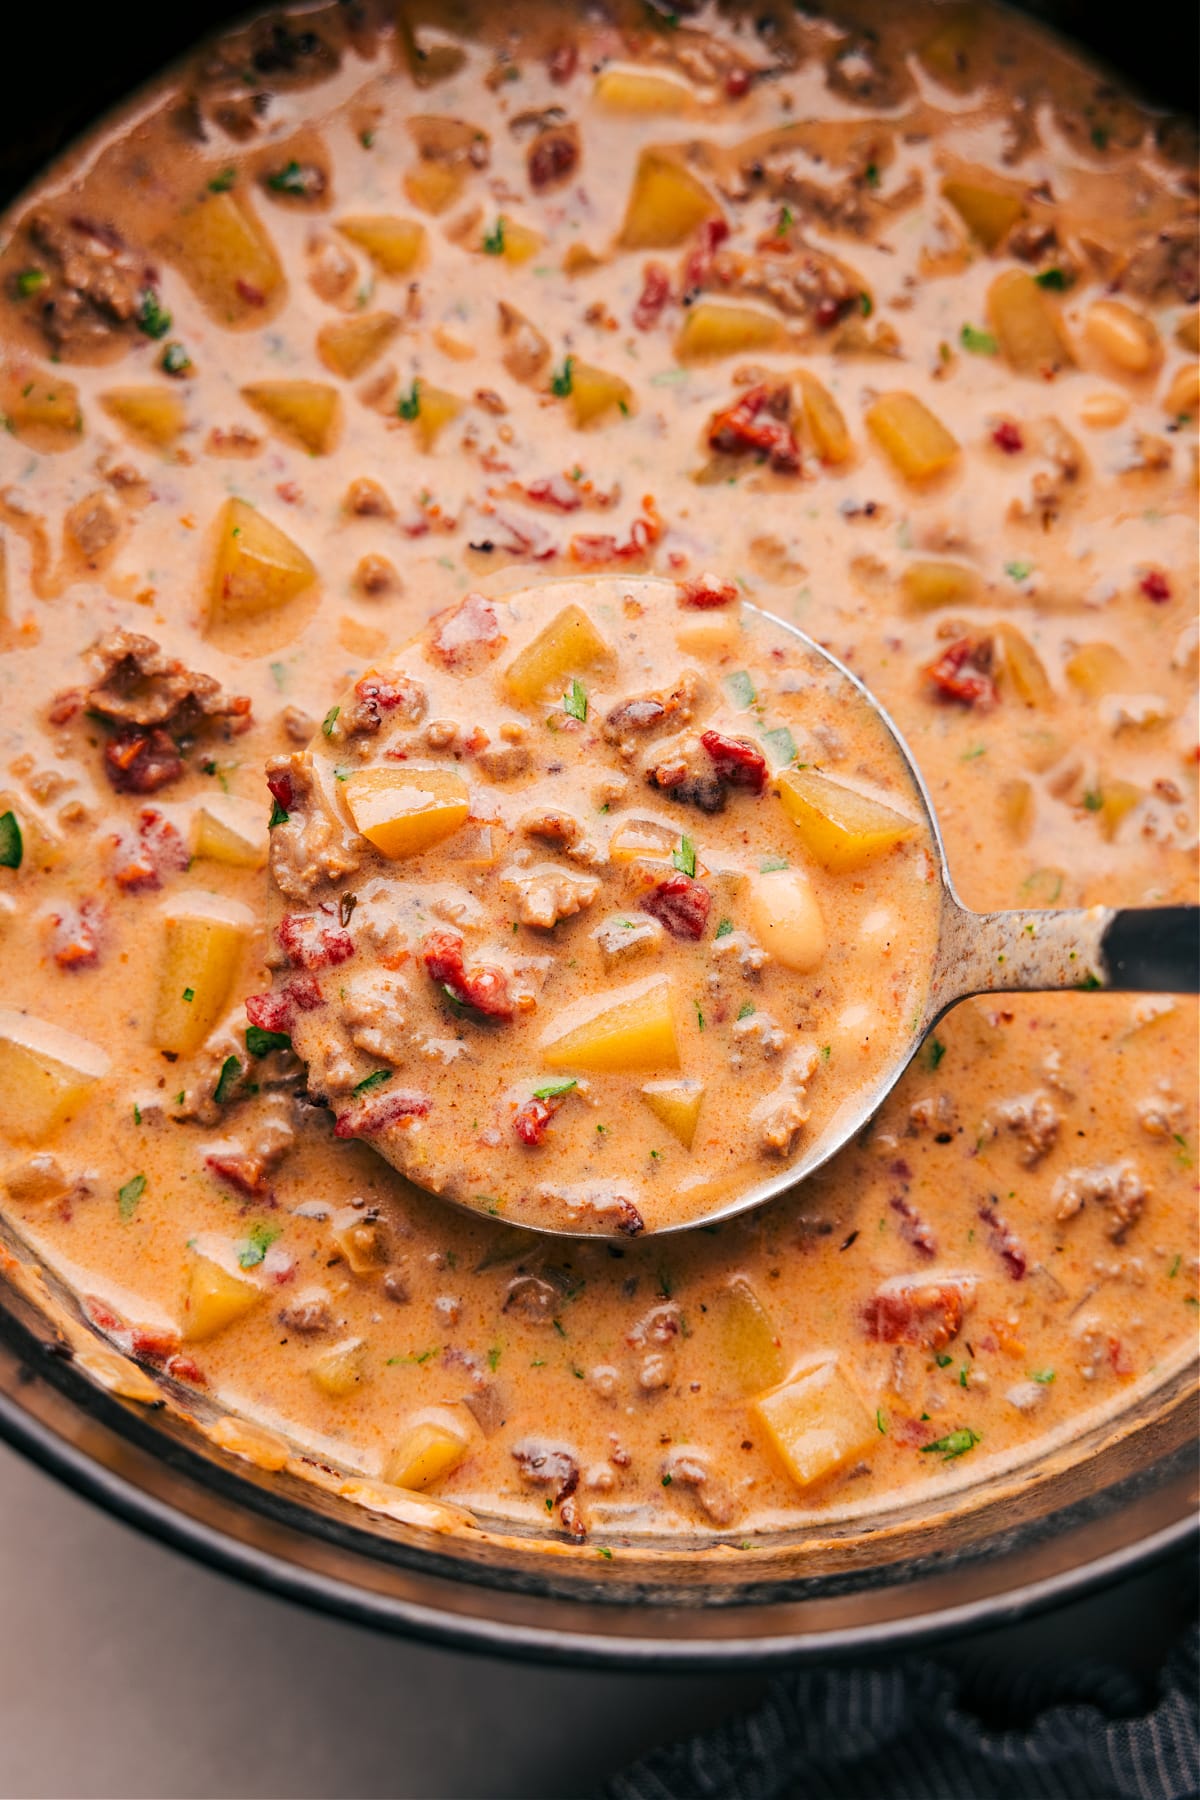 A pan filled with the finished Tuscan Sausage and Potato soup, full of flavor and ingredients, warm and ready to be enjoyed as a delicious meal.